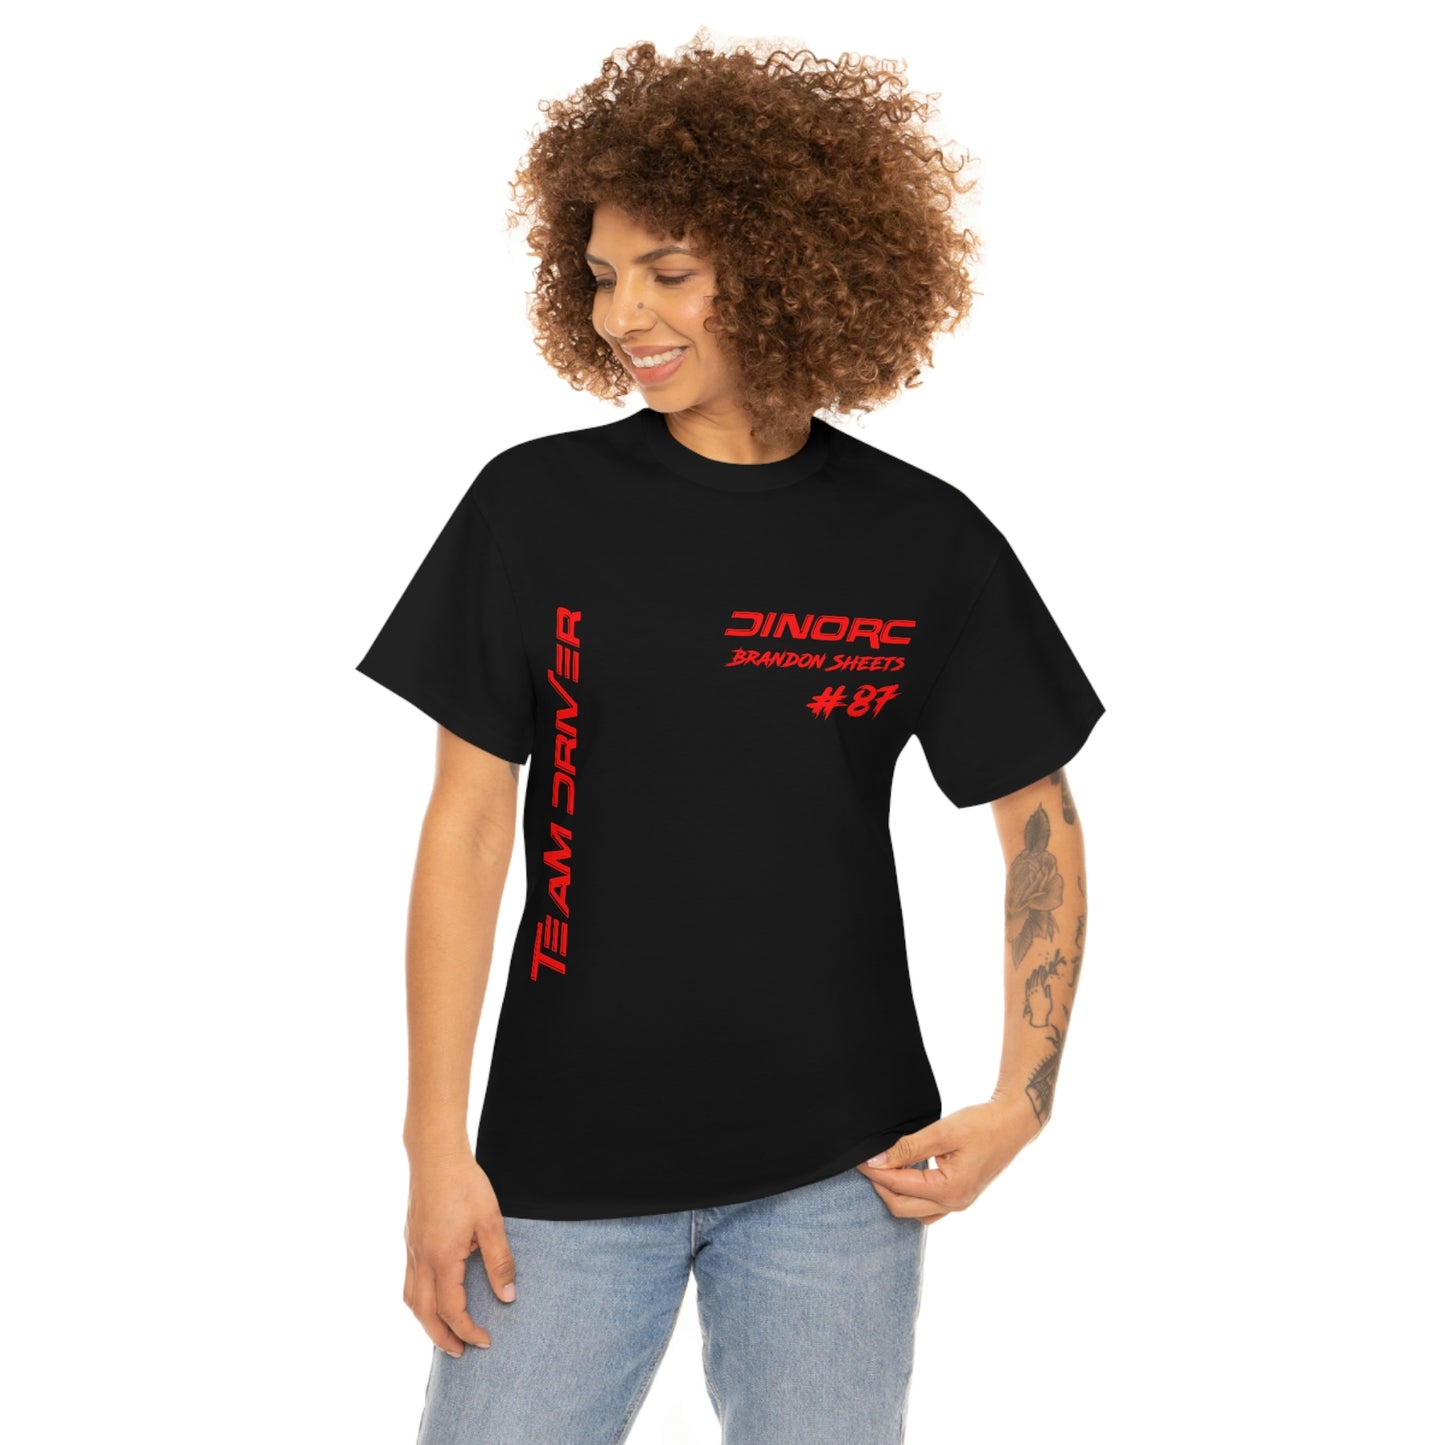 Vertical Team Driver Brandon Sheets Front and Back DinoRc Logo T-Shirt S-5x 5 colors